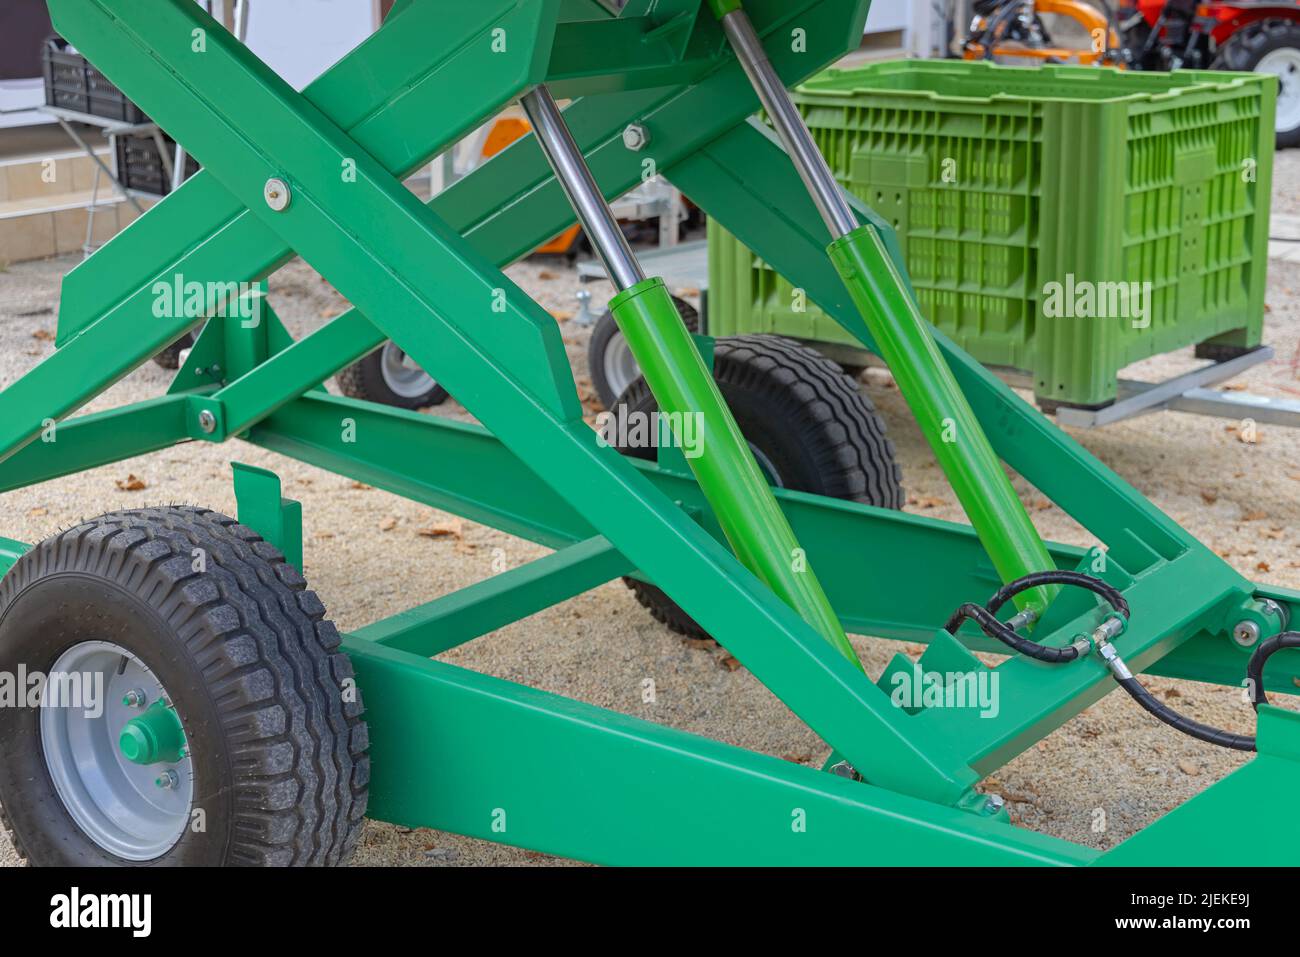 Two Pistons Hydraulic Platform at Green Agriculture Trailer Stock Photo